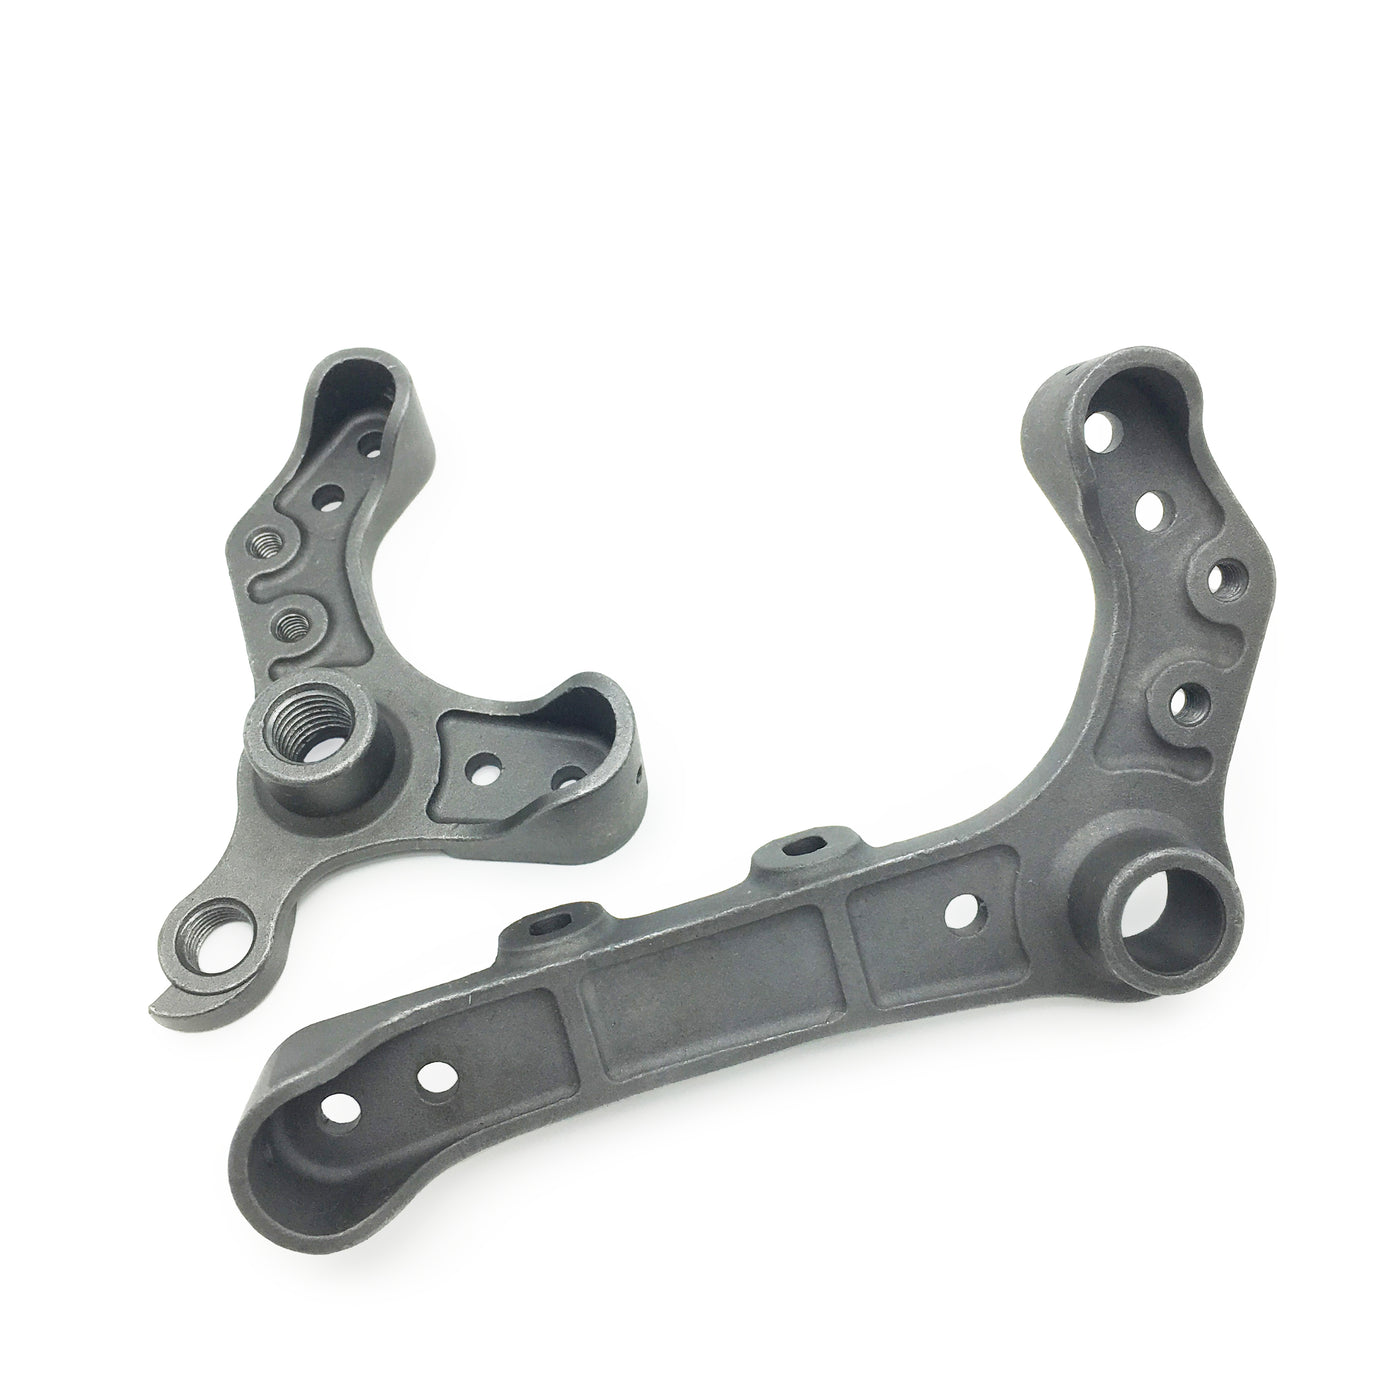 Rear thru-axle (M12 x 1.5) dropouts for flat mount disc brakes - with eyelets